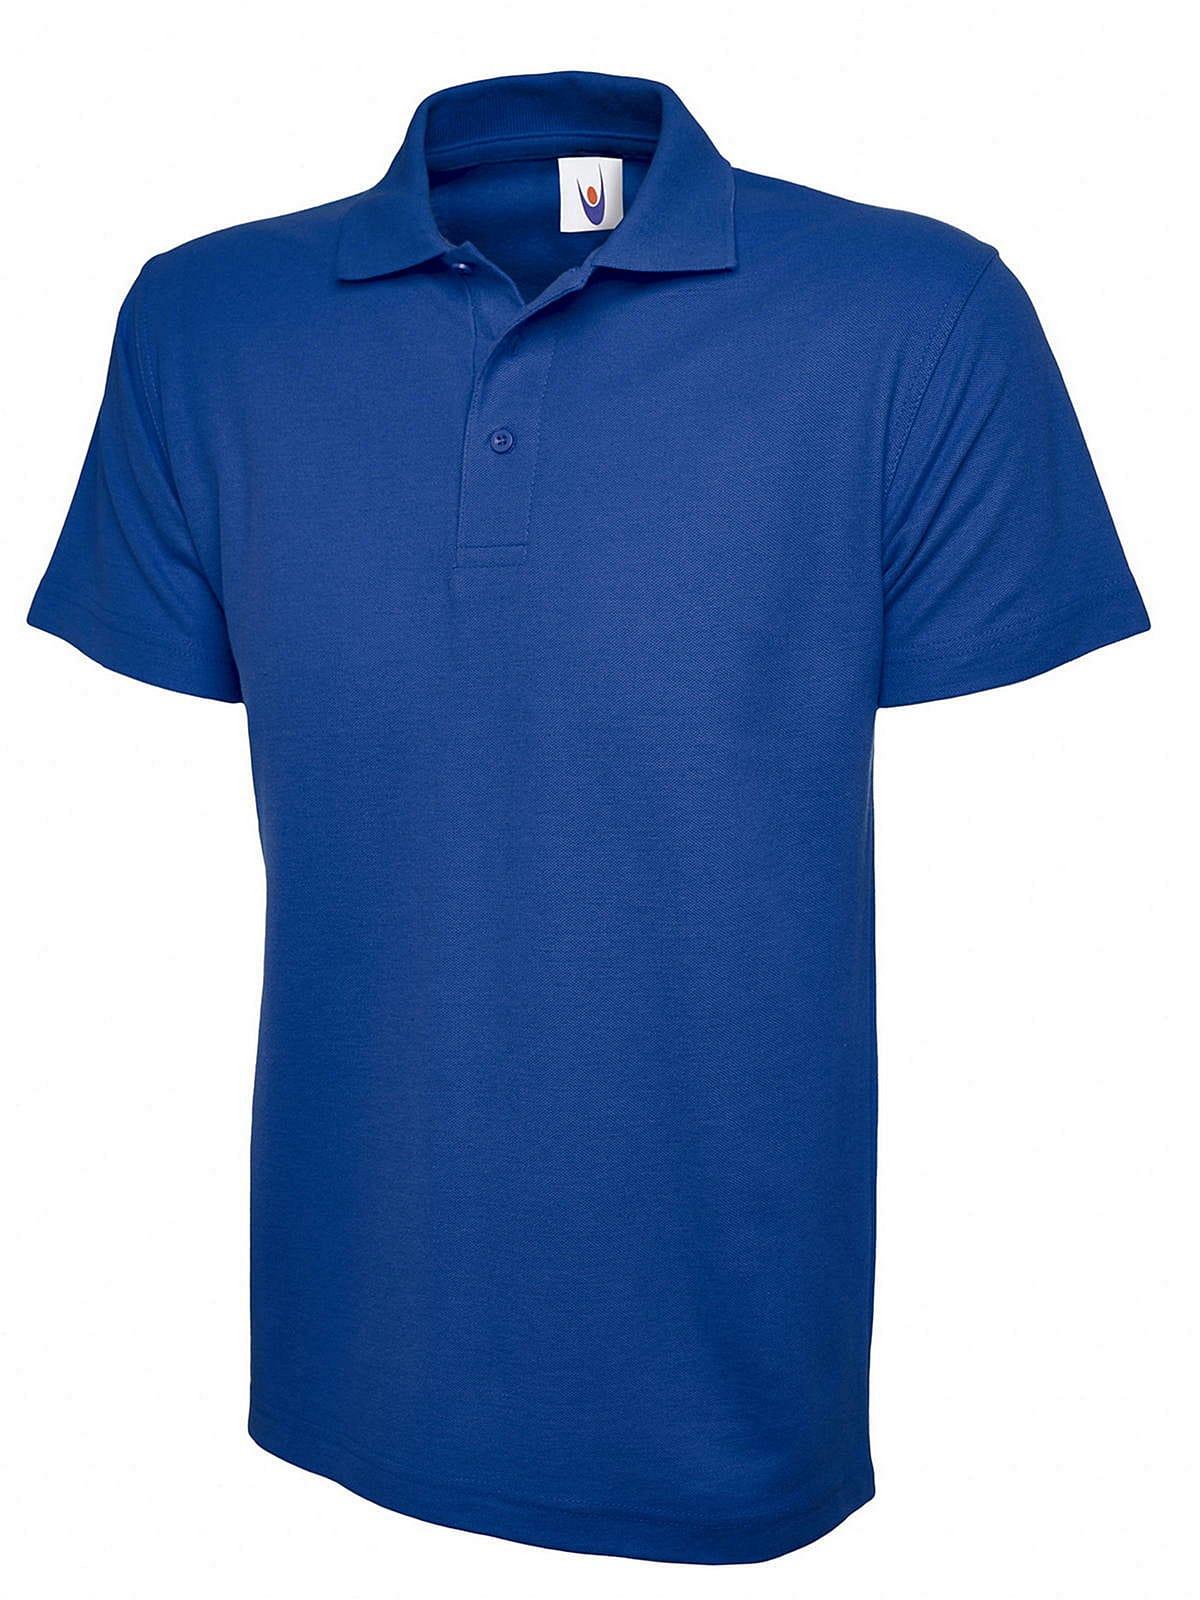 Uneek 220GSM Classic Polo Shirt in Royal Blue (Product Code: UC101)